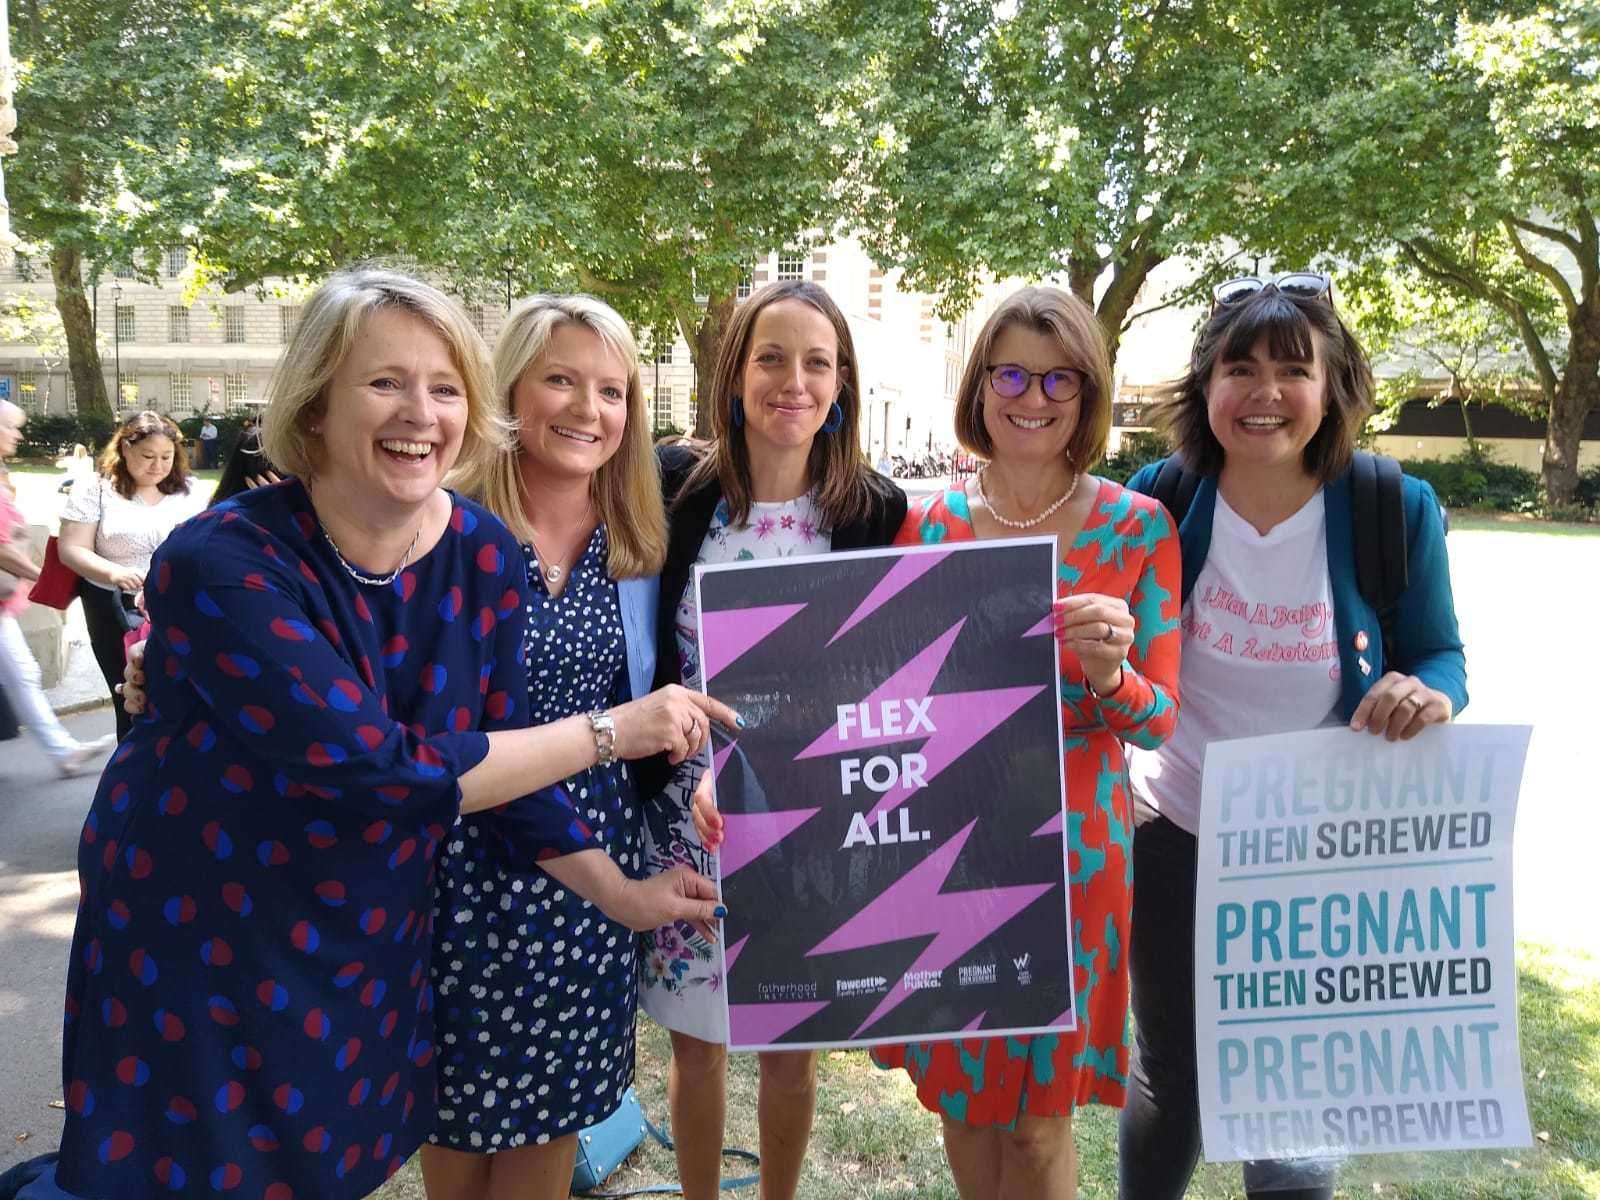 Helen Whately with founder of Pregnant Then Screwed, Joeli Brearley and other MPs